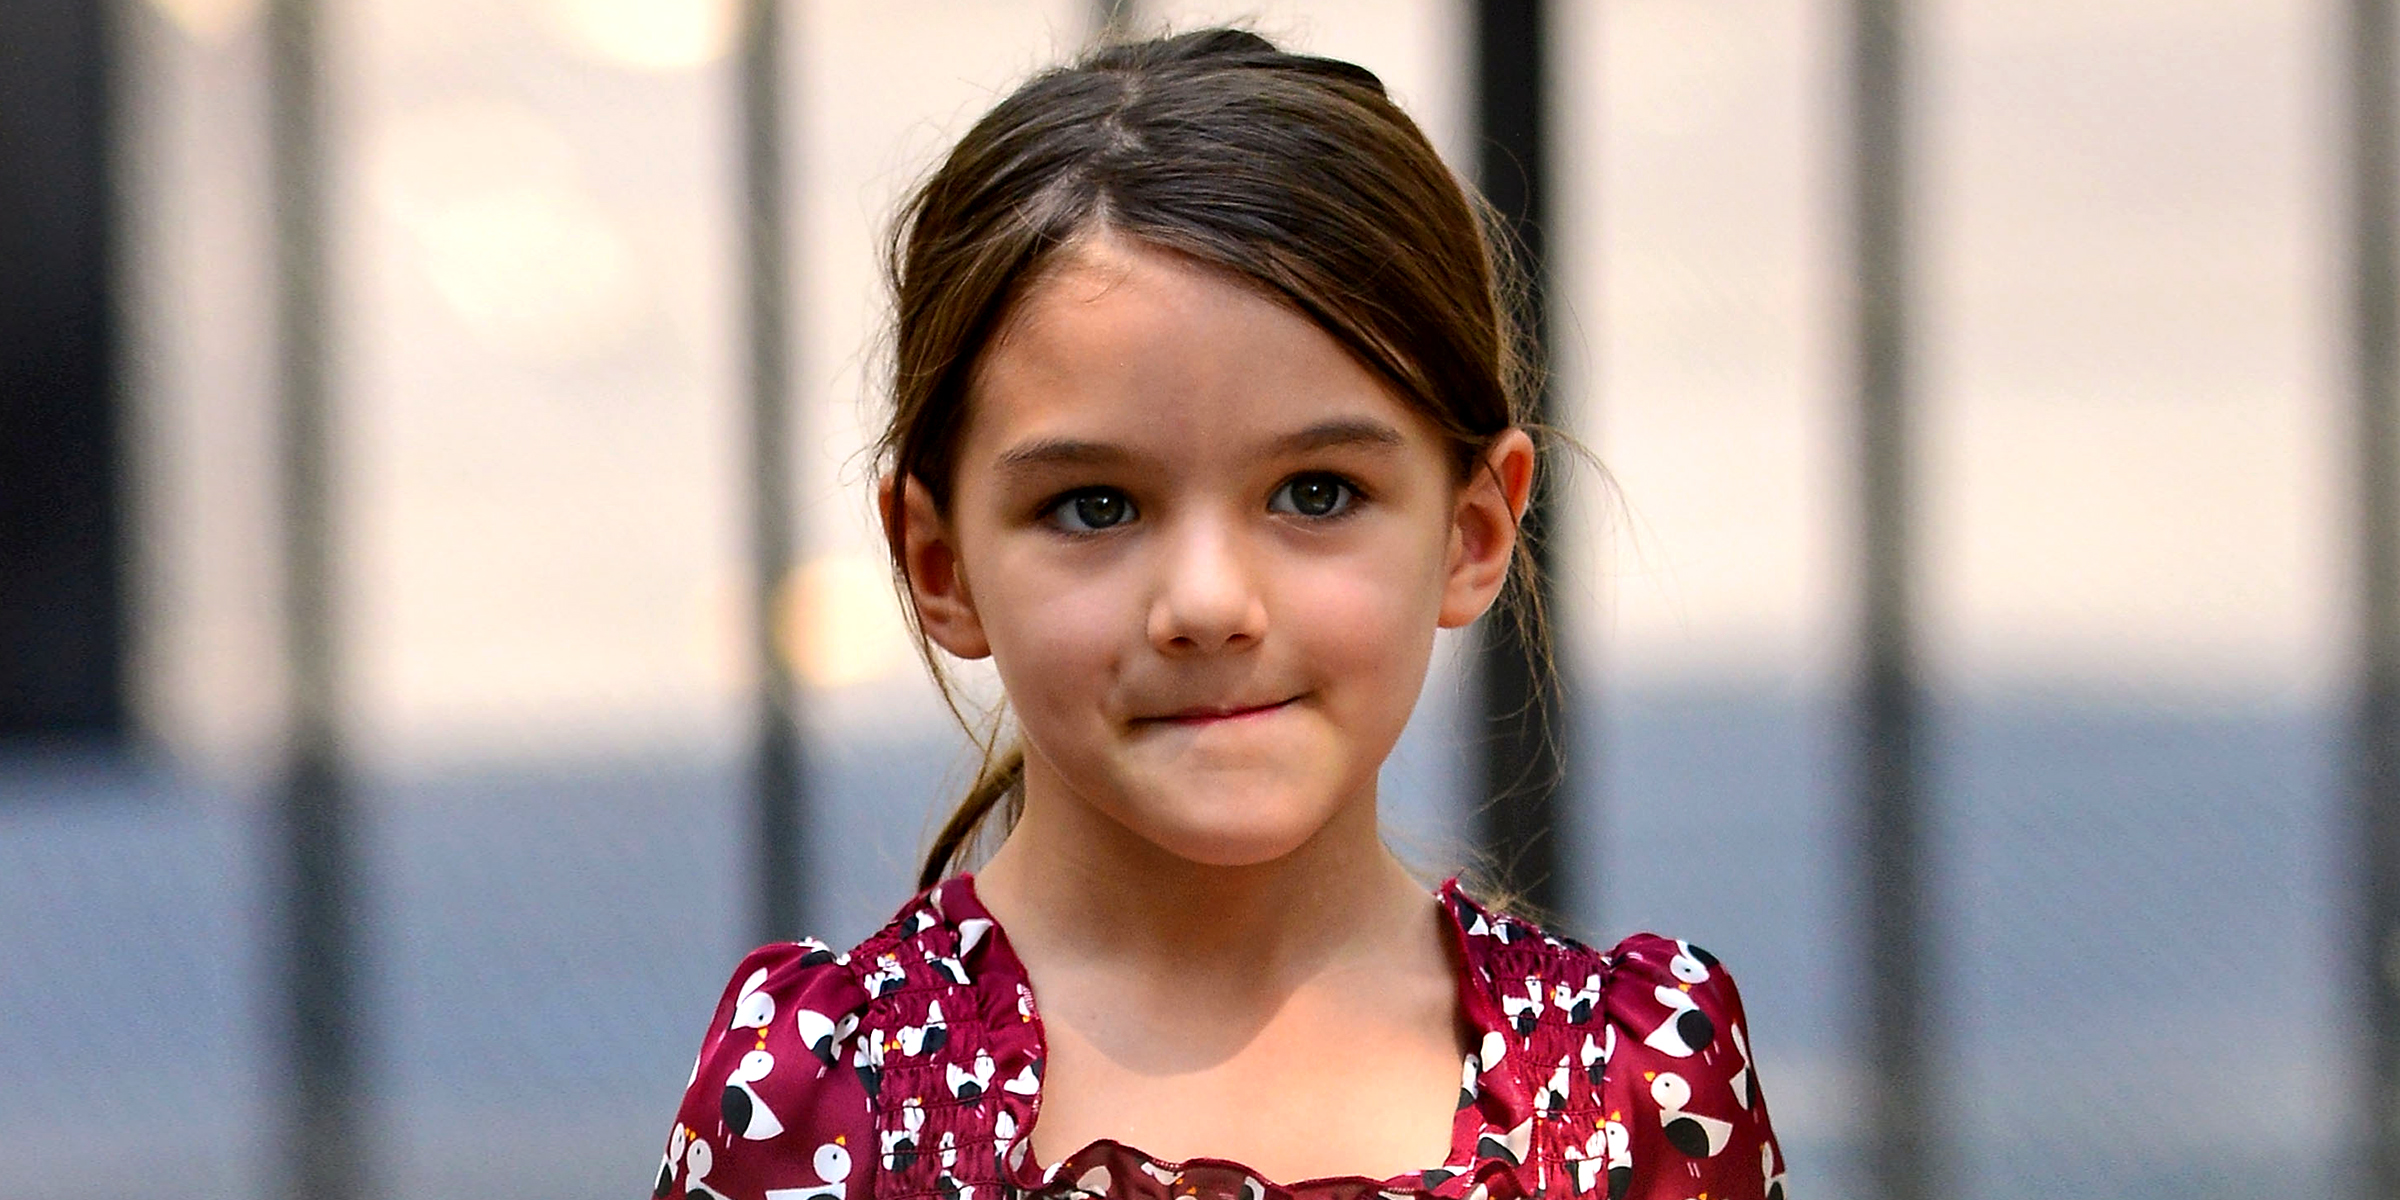 Suri Cruise | Source: Getty Images